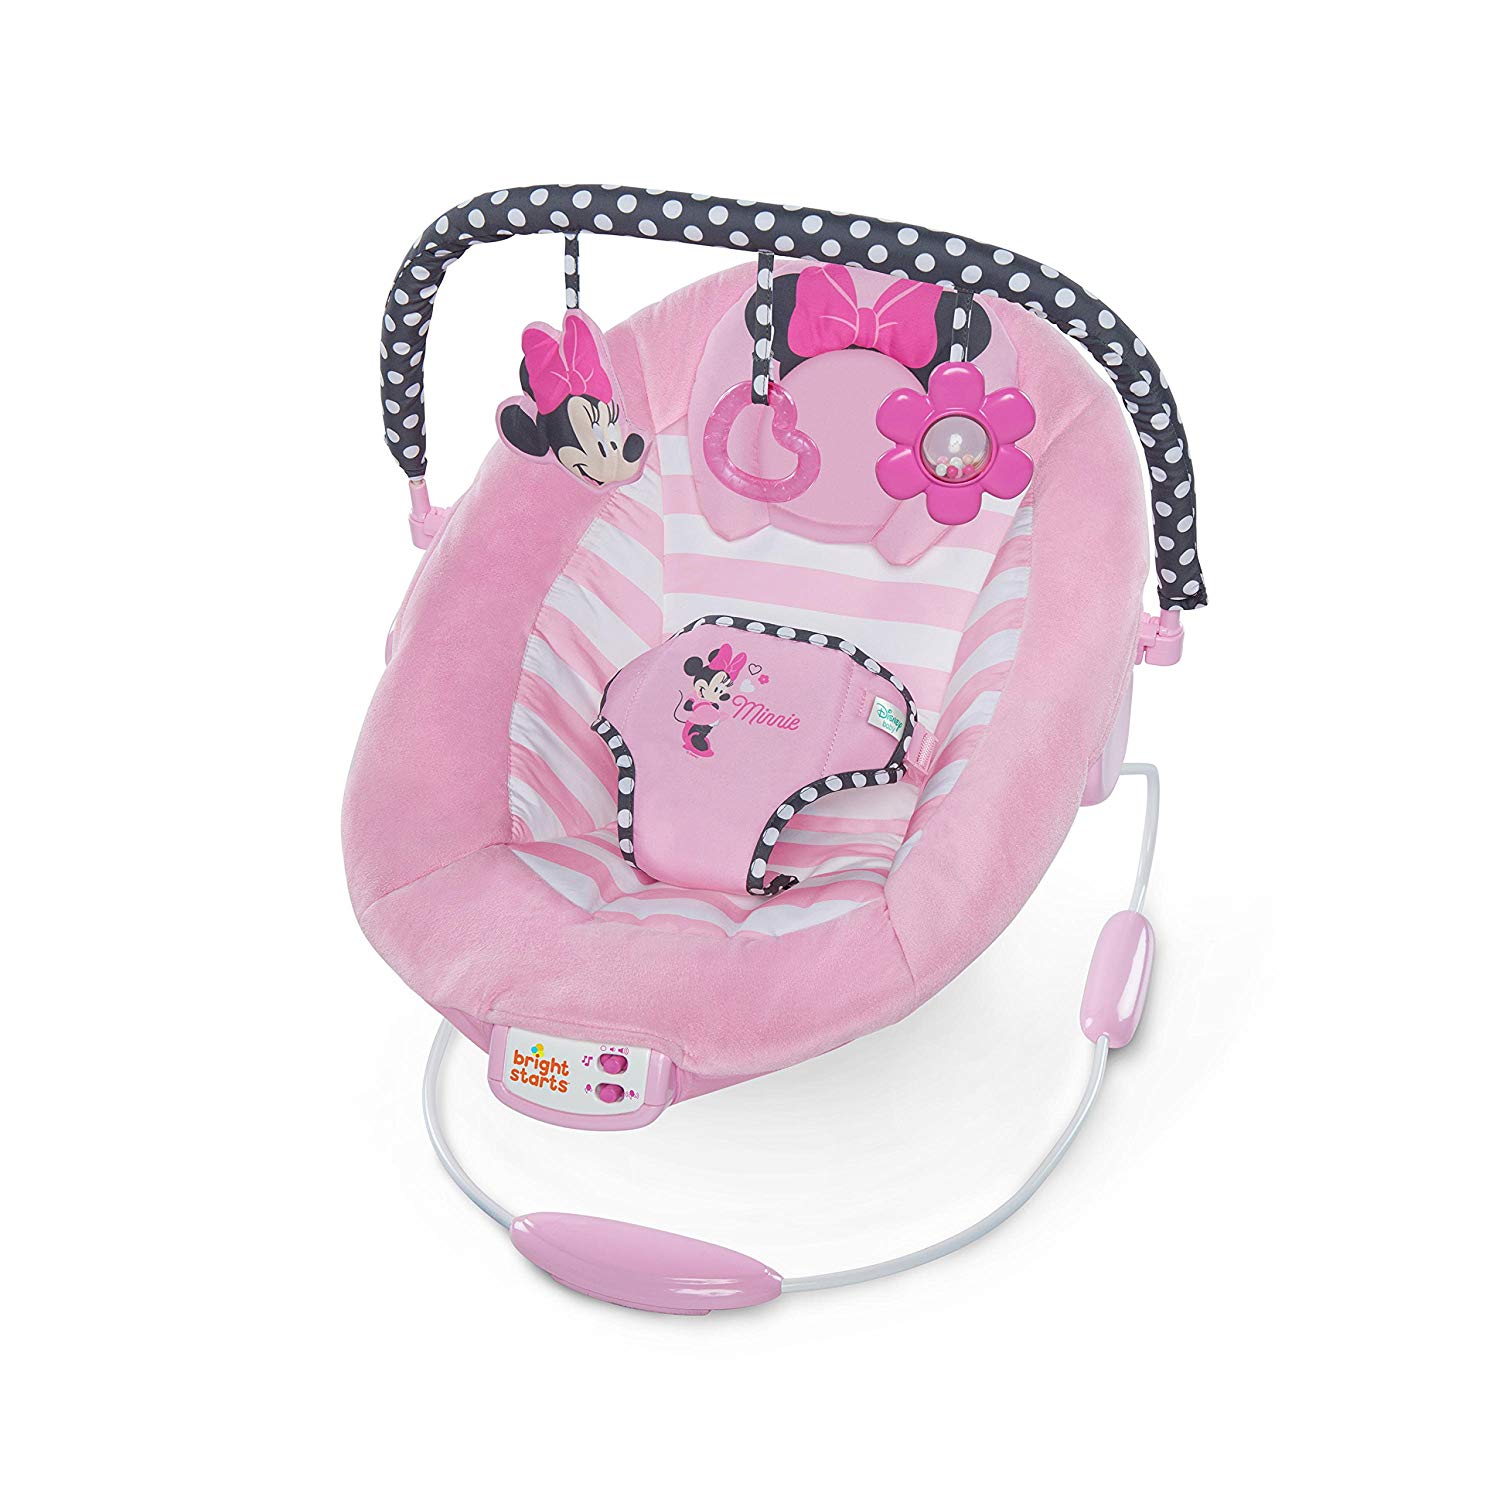 Disney Baby, Minnie Mouse Blushing Bows Rocker with Melodies, Volume Controls, Vibrations and Auto Off Function